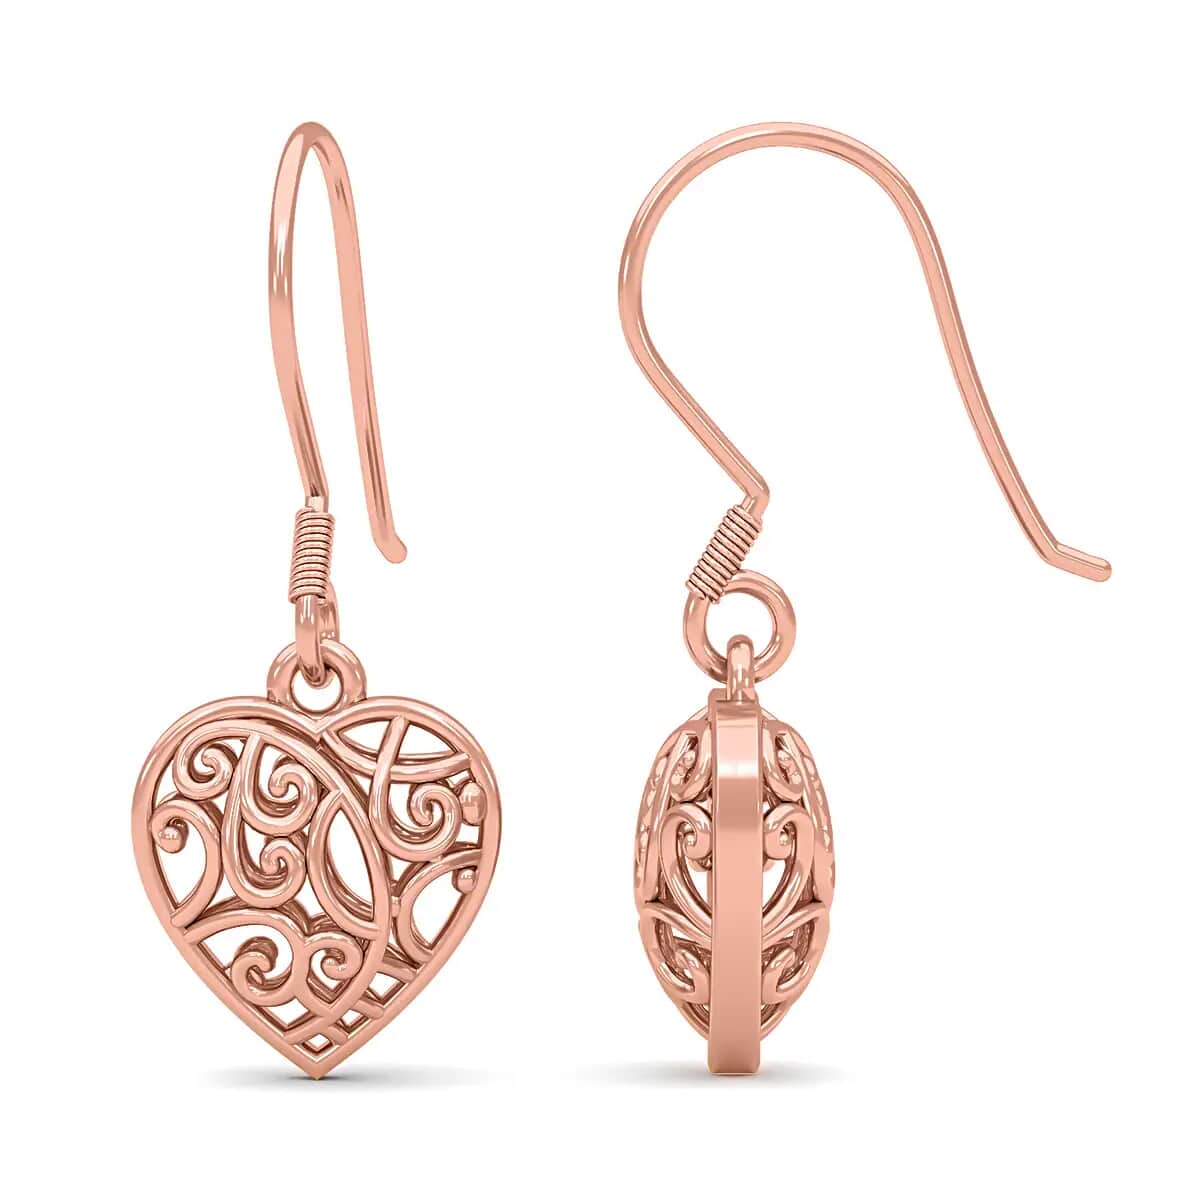 Mother’s Day Gift Openwork Drop Dangle Earrings in 14K Rose Gold Plated Sterling Silver, Filigree Heart Earrings, Dangle Silver Earrings For Women image number 5